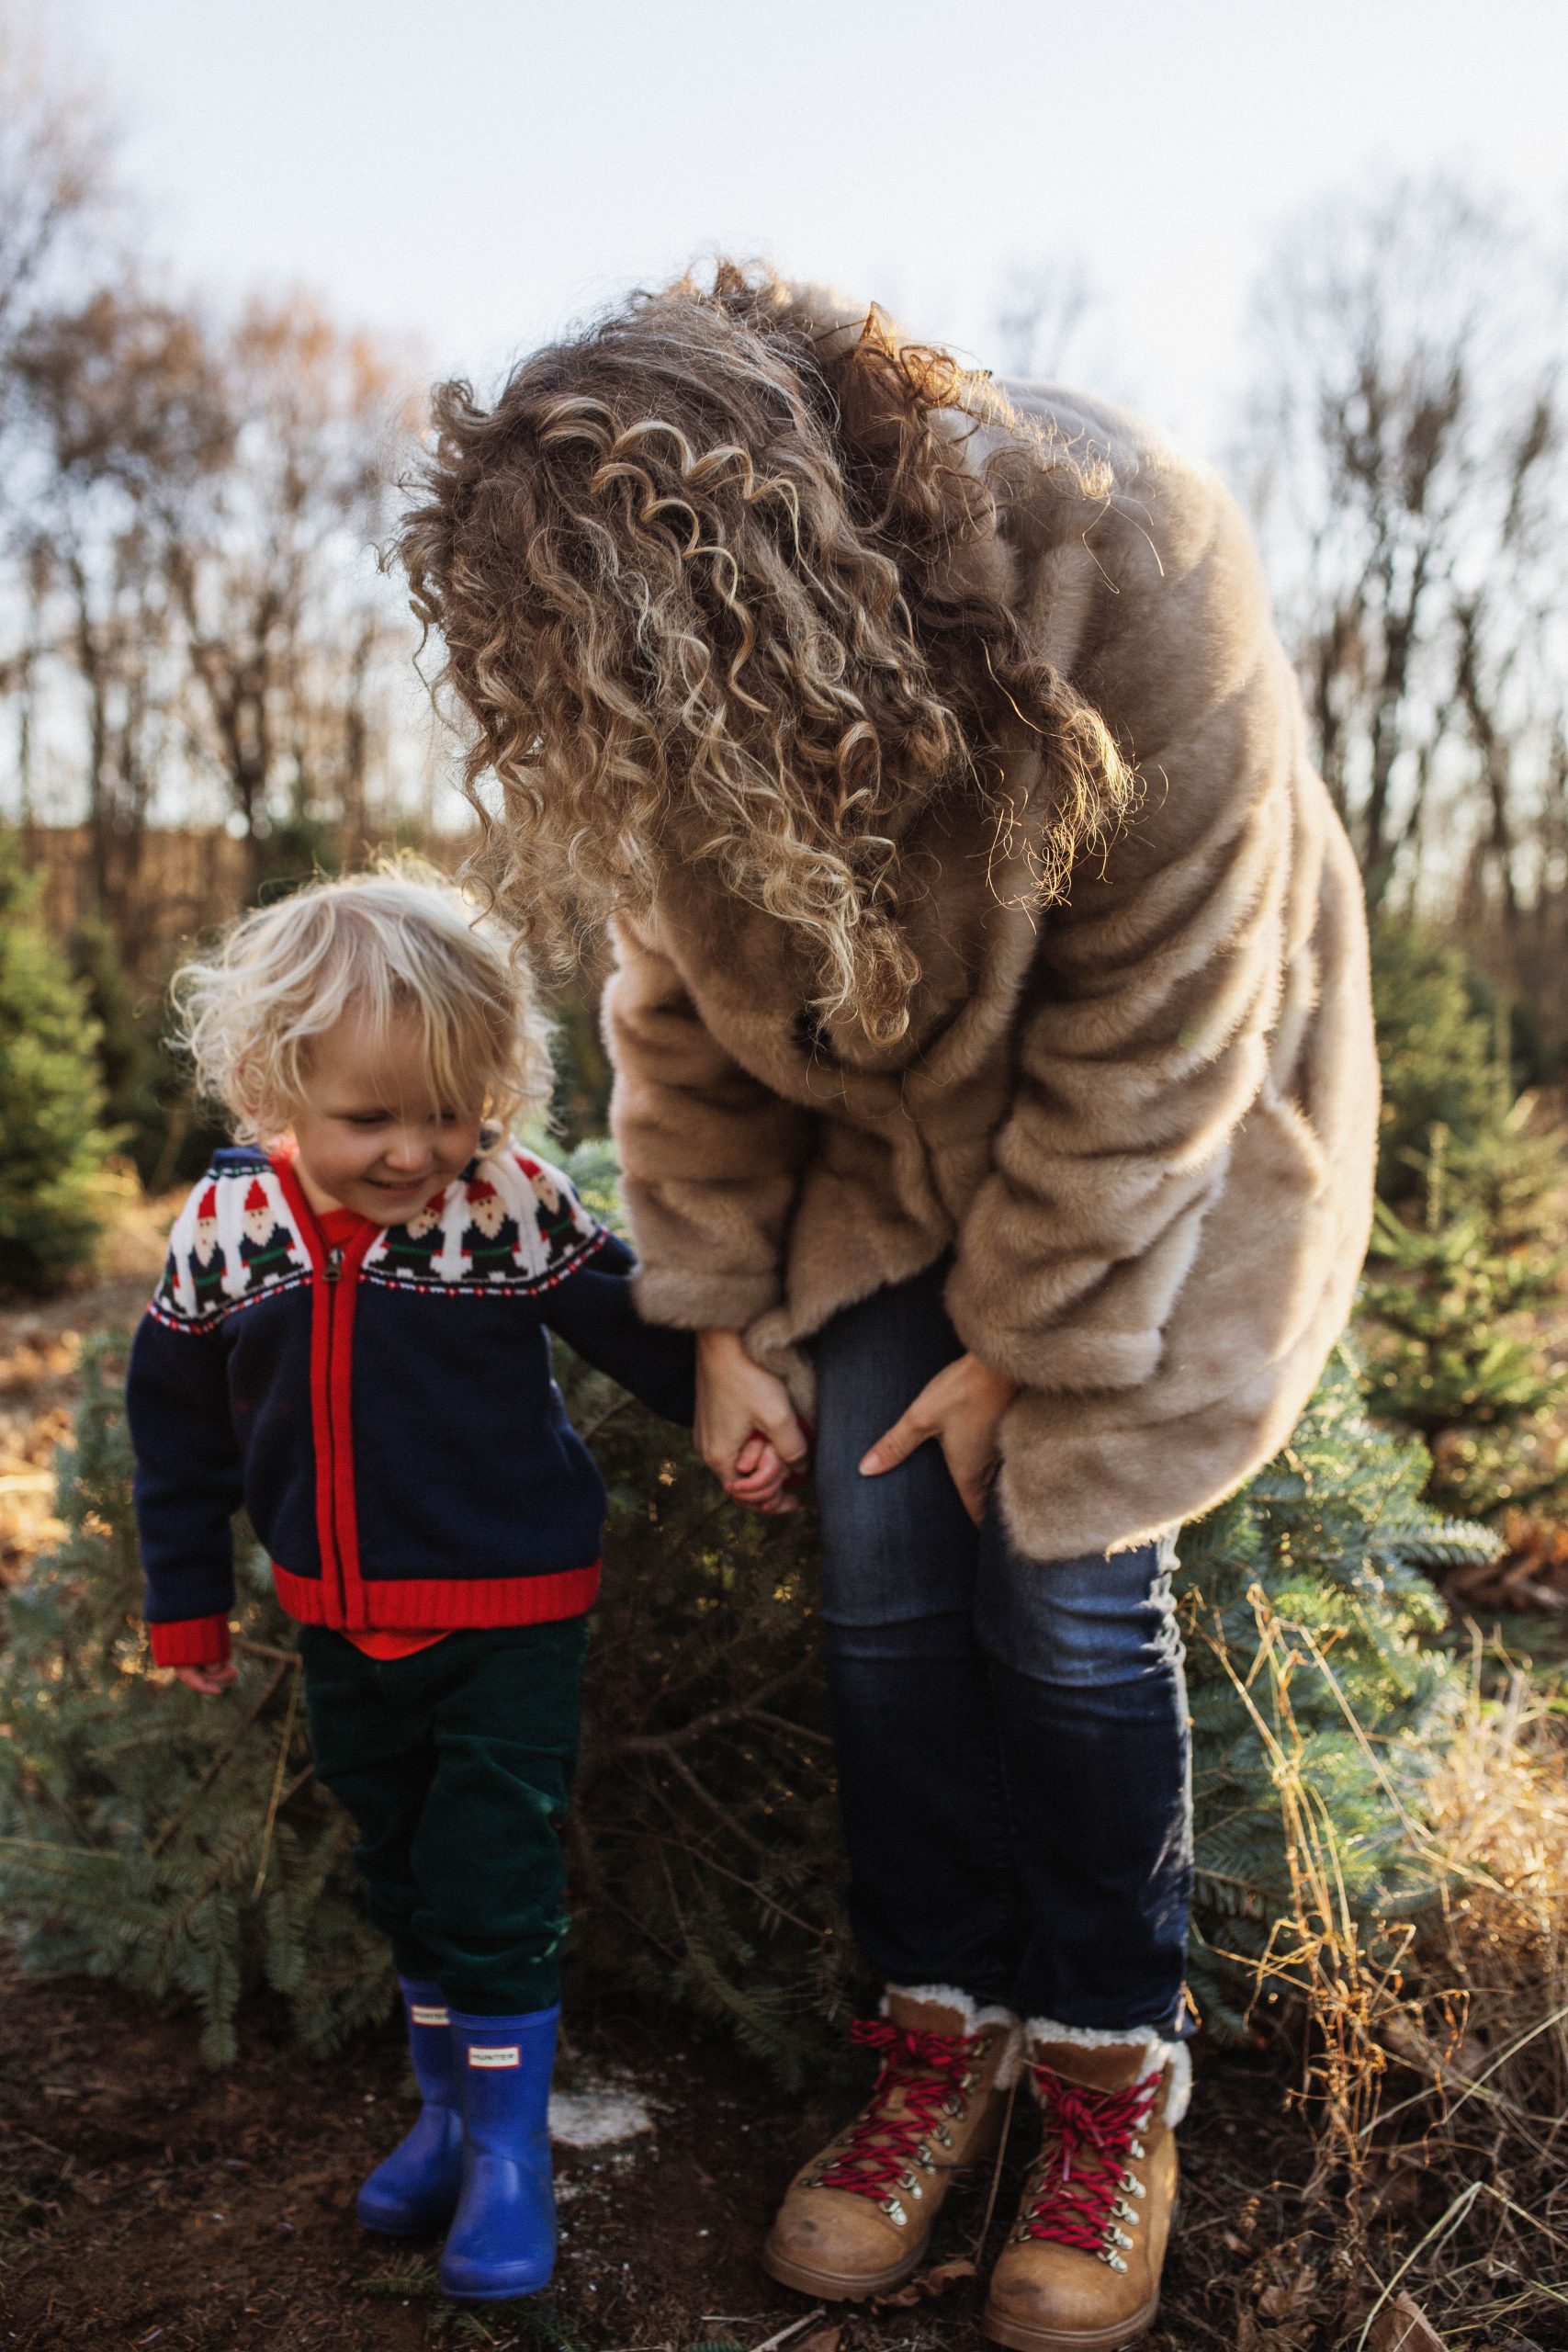 Finding the Perfect Tree at the Tree Farm